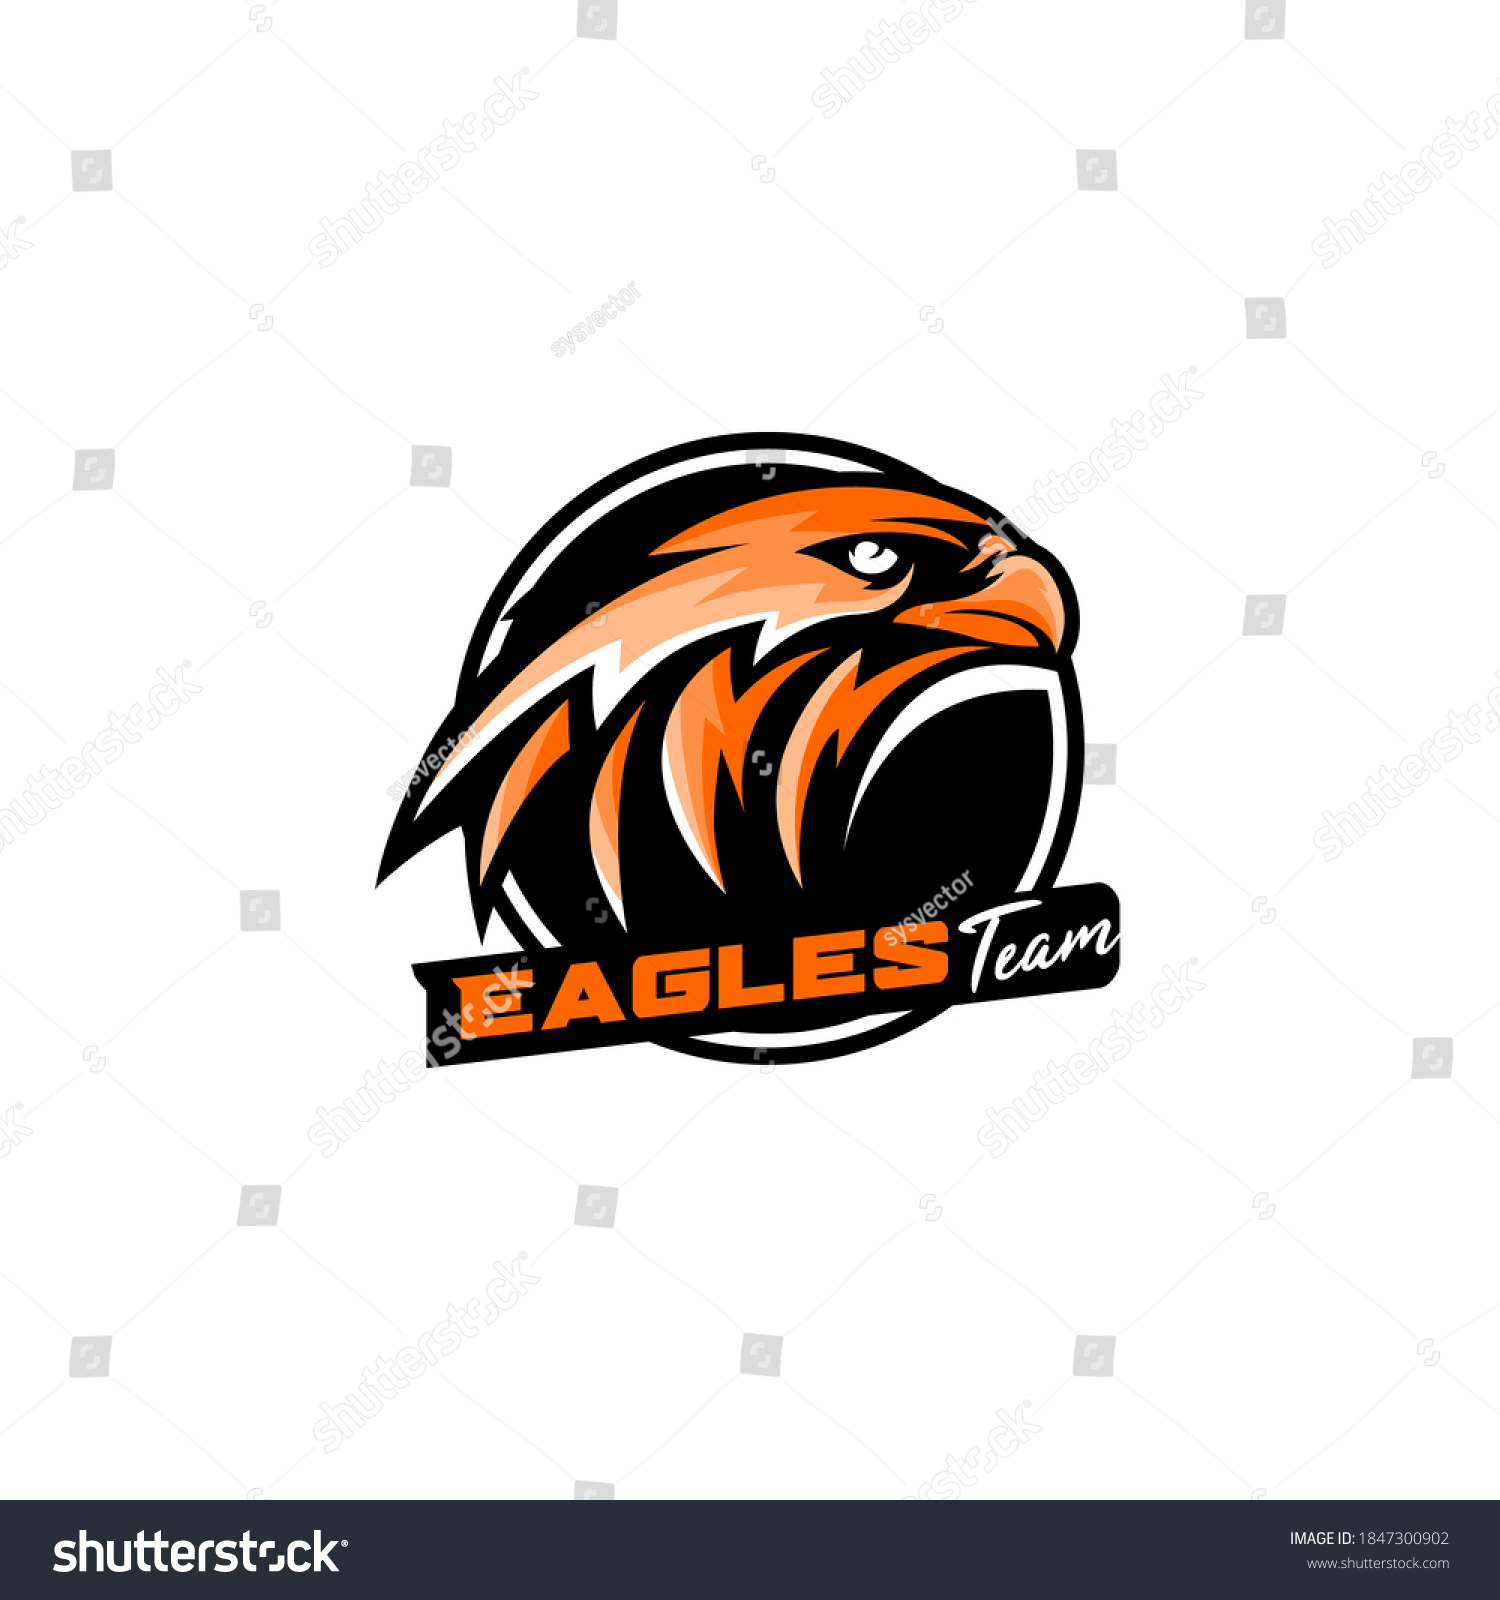 Eagle Team Ssport Sports Logo Template Stock Vector Royalty Free Shutterstock